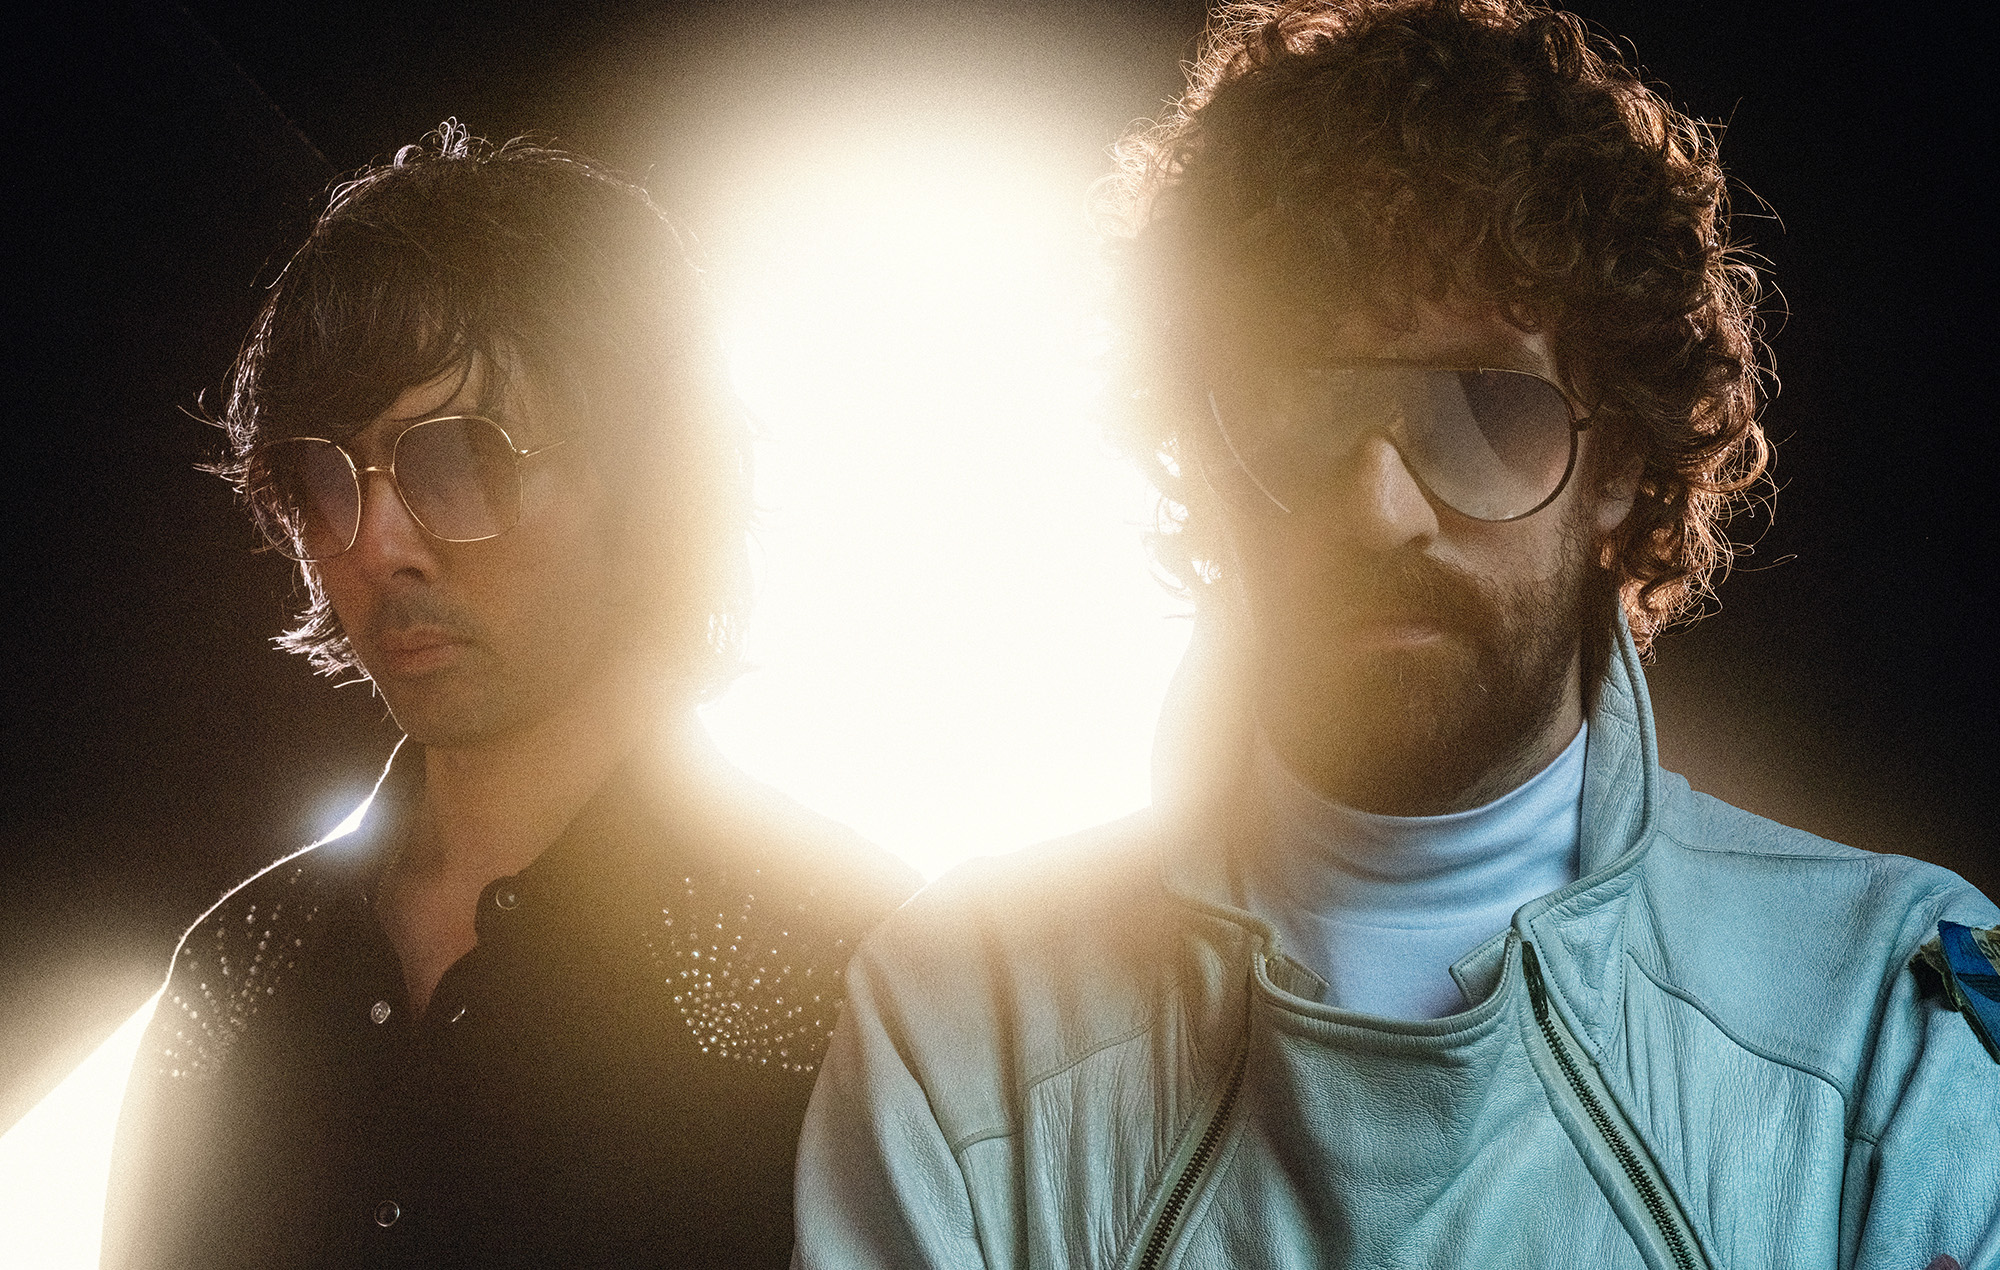 Justice – ‘Hyperdrama’ review: a blockbuster return from dominant dance duo